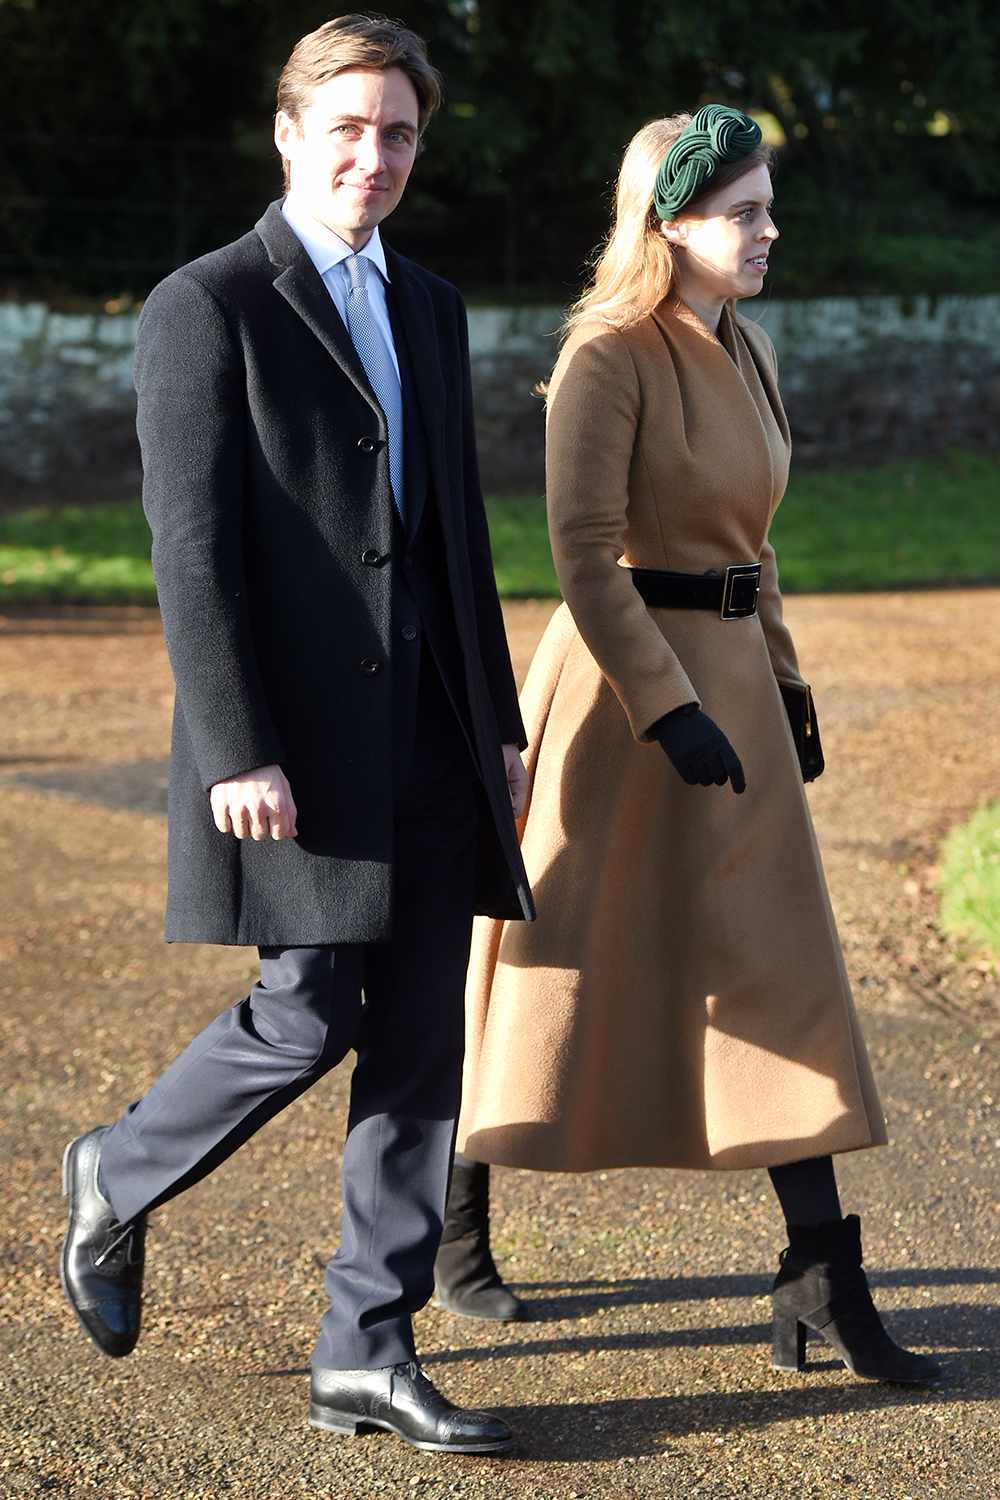 Edoardo Mapelli Mozzi and Princess Beatrice after attending the Christmas Day morning church service at St Mary Magdalene Church in Sandringham, Norfolk. (Photo by Joe Giddens/PA Images via Getty Images)